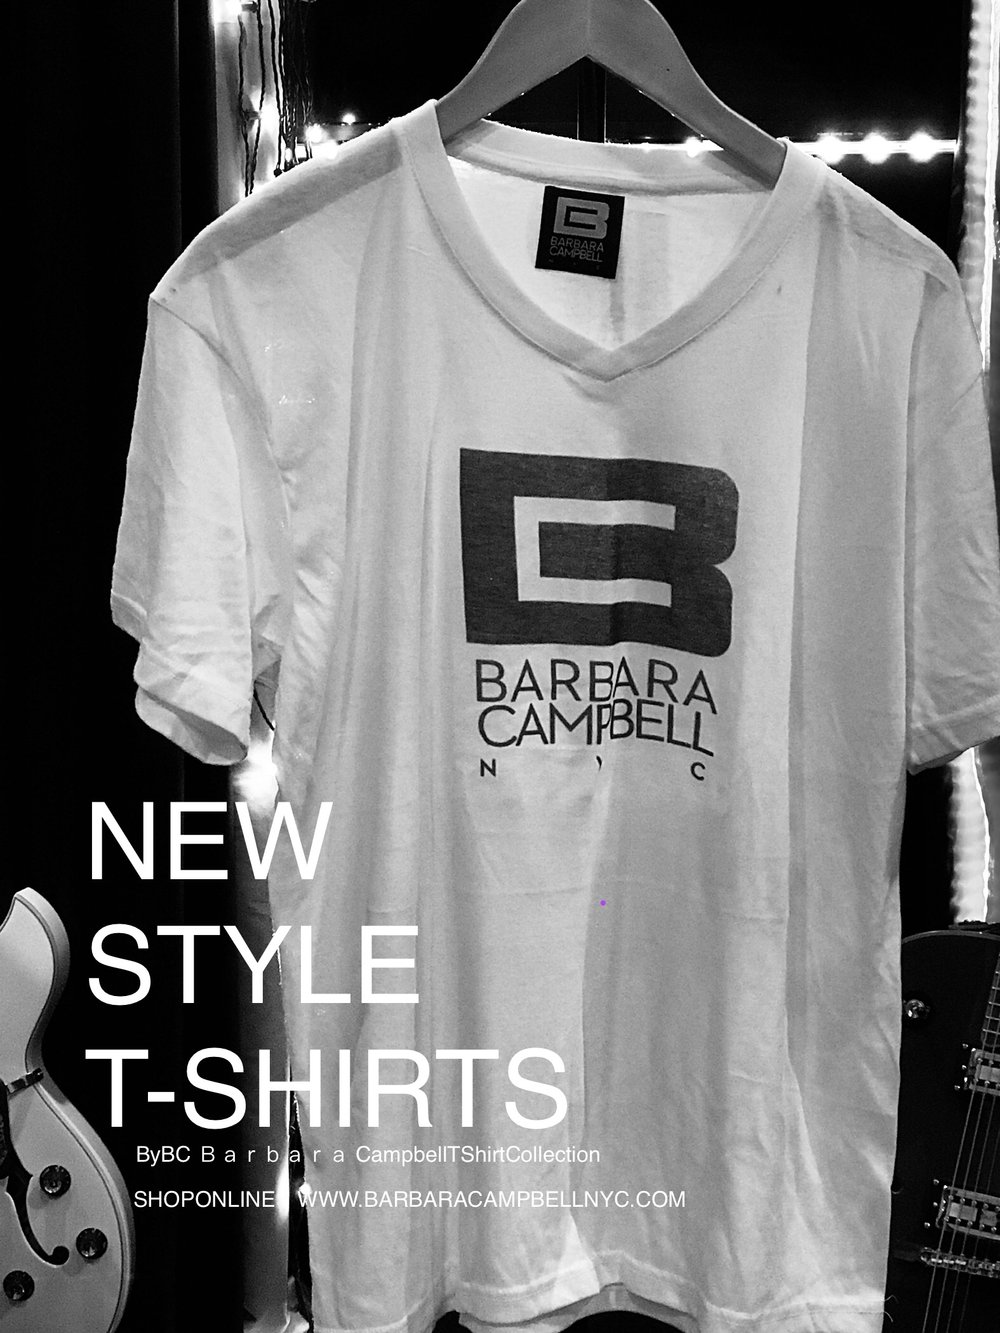 BARBARA CAMPBELL NYC T-SHIRTS: BC™ Logo - Women's Cotton/Poly white - Shirt From Barbara Campbell NYC — Barbara Campbell NYC Made In Brooklyn BrooklynLux Handmade Jewelry Accessories Handbags Fashion +Beauty & Home